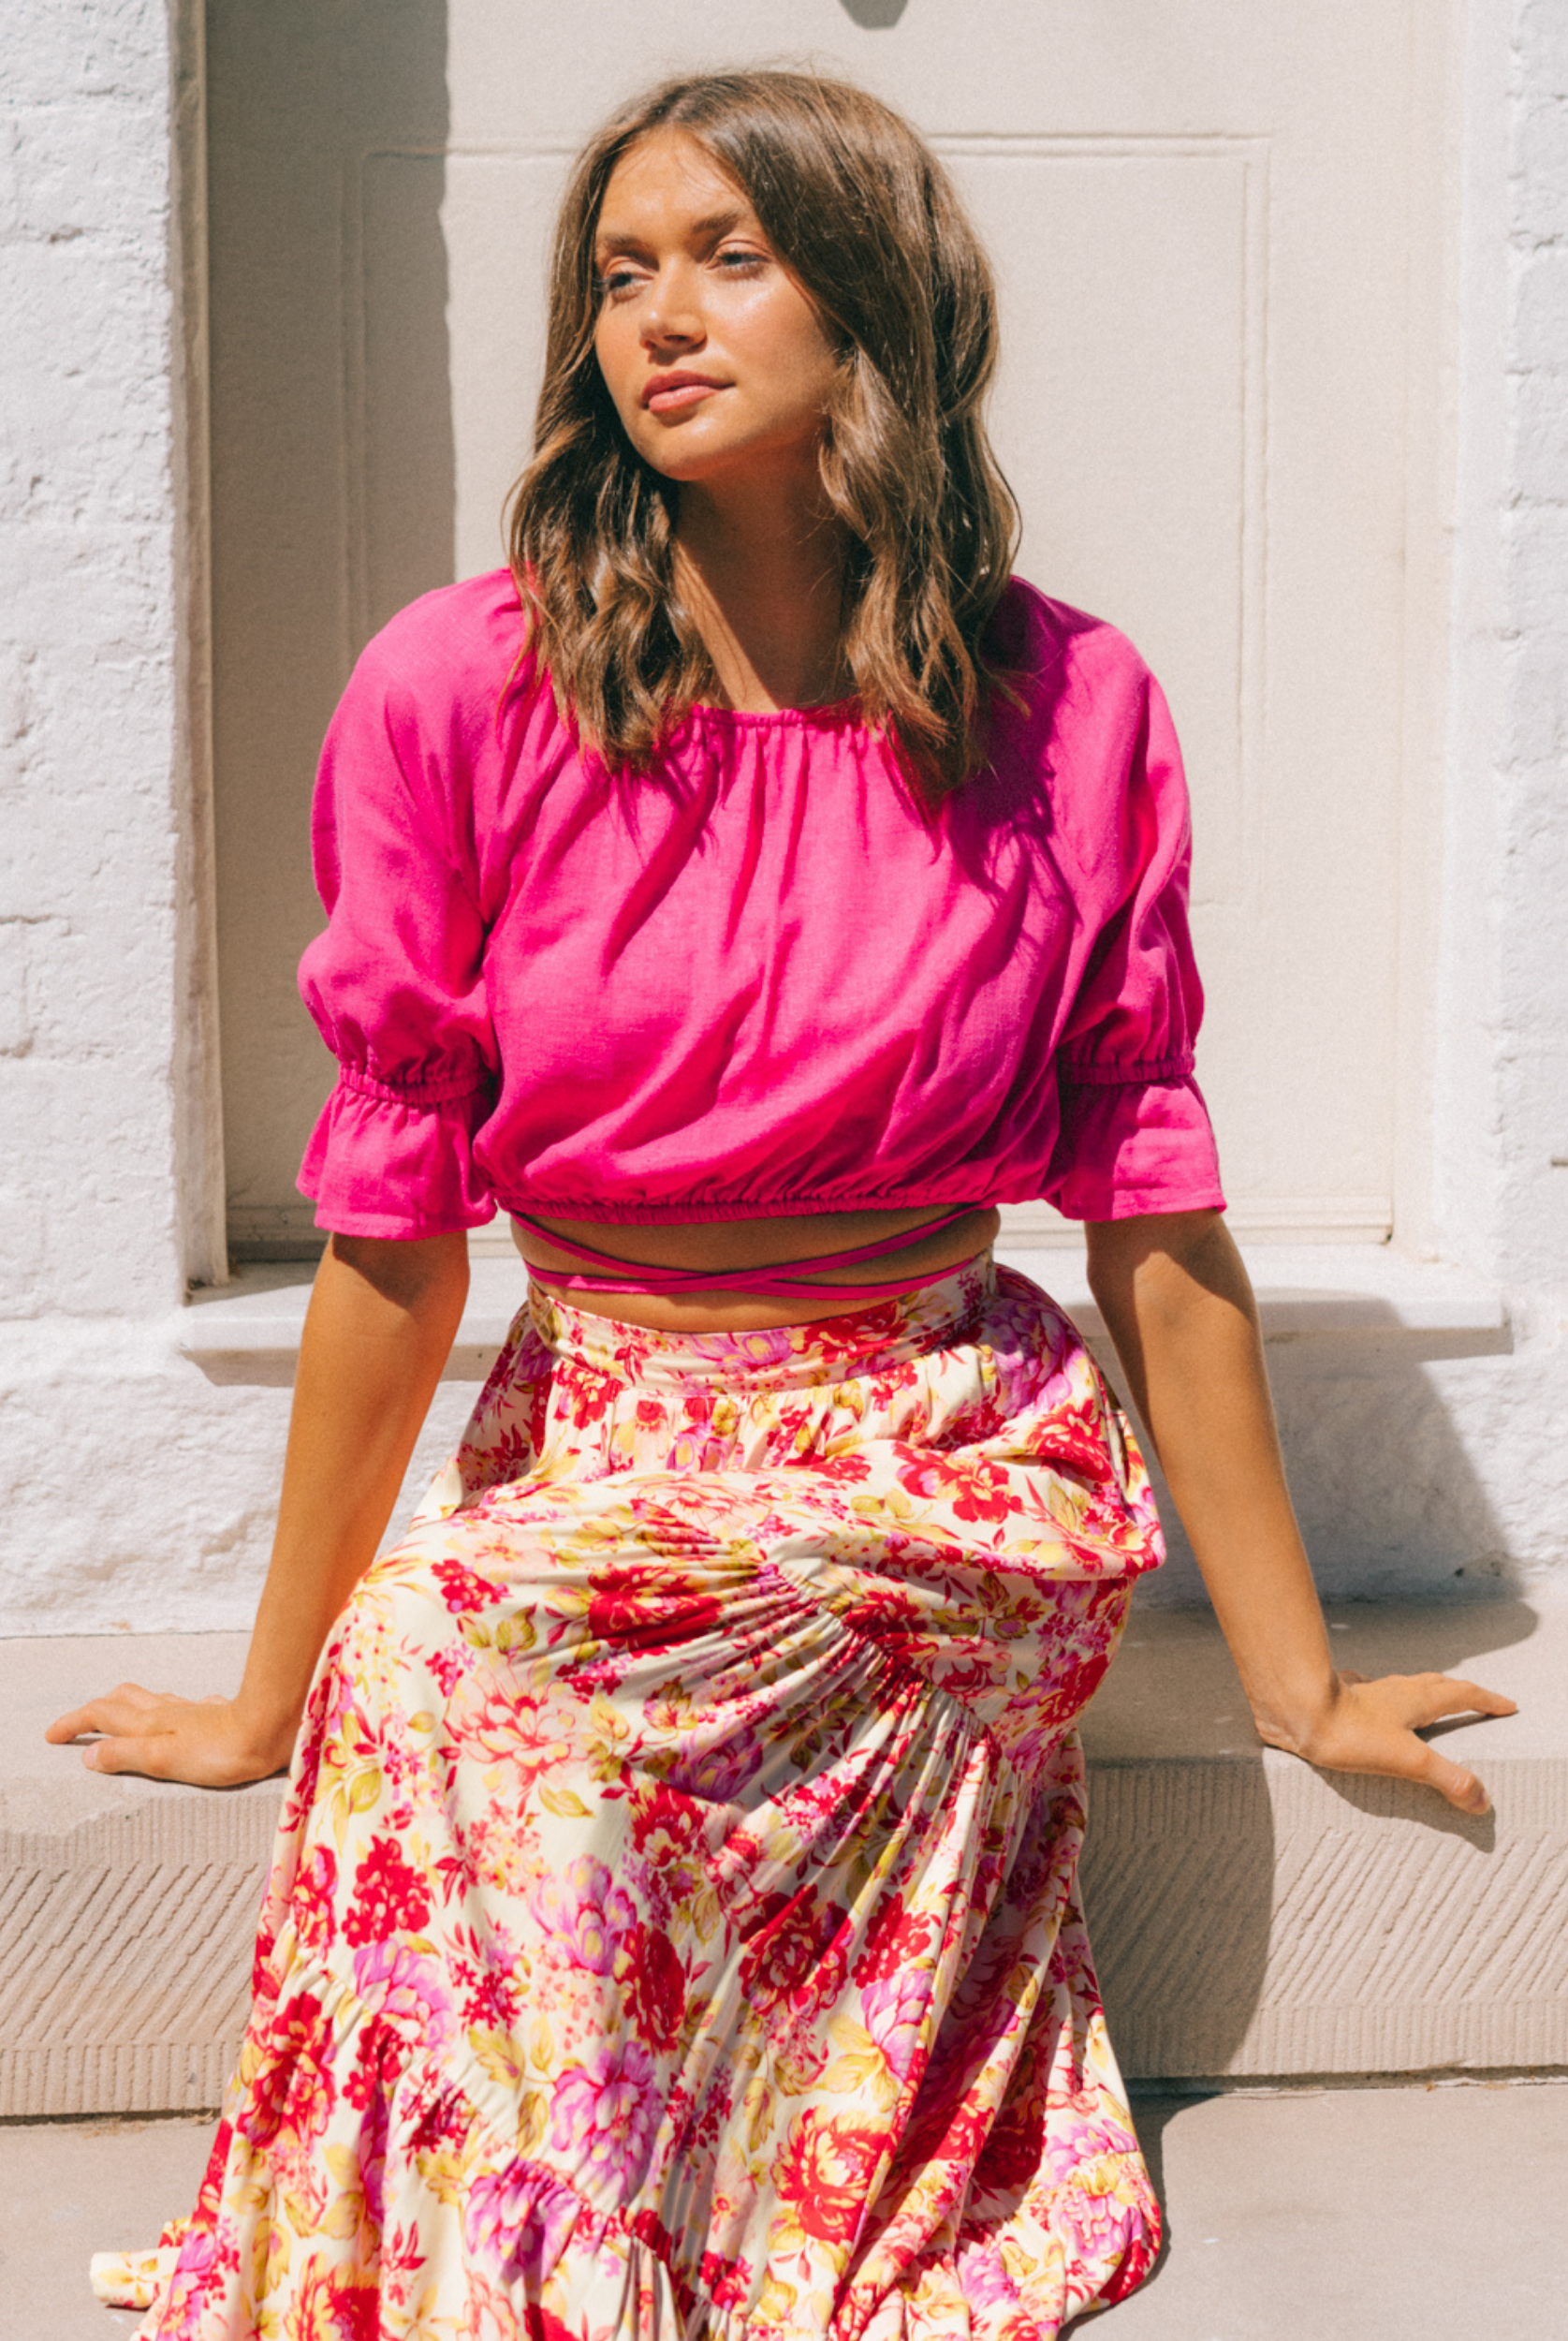 Model wearing the Riley Bright pink top and sitting down on a step